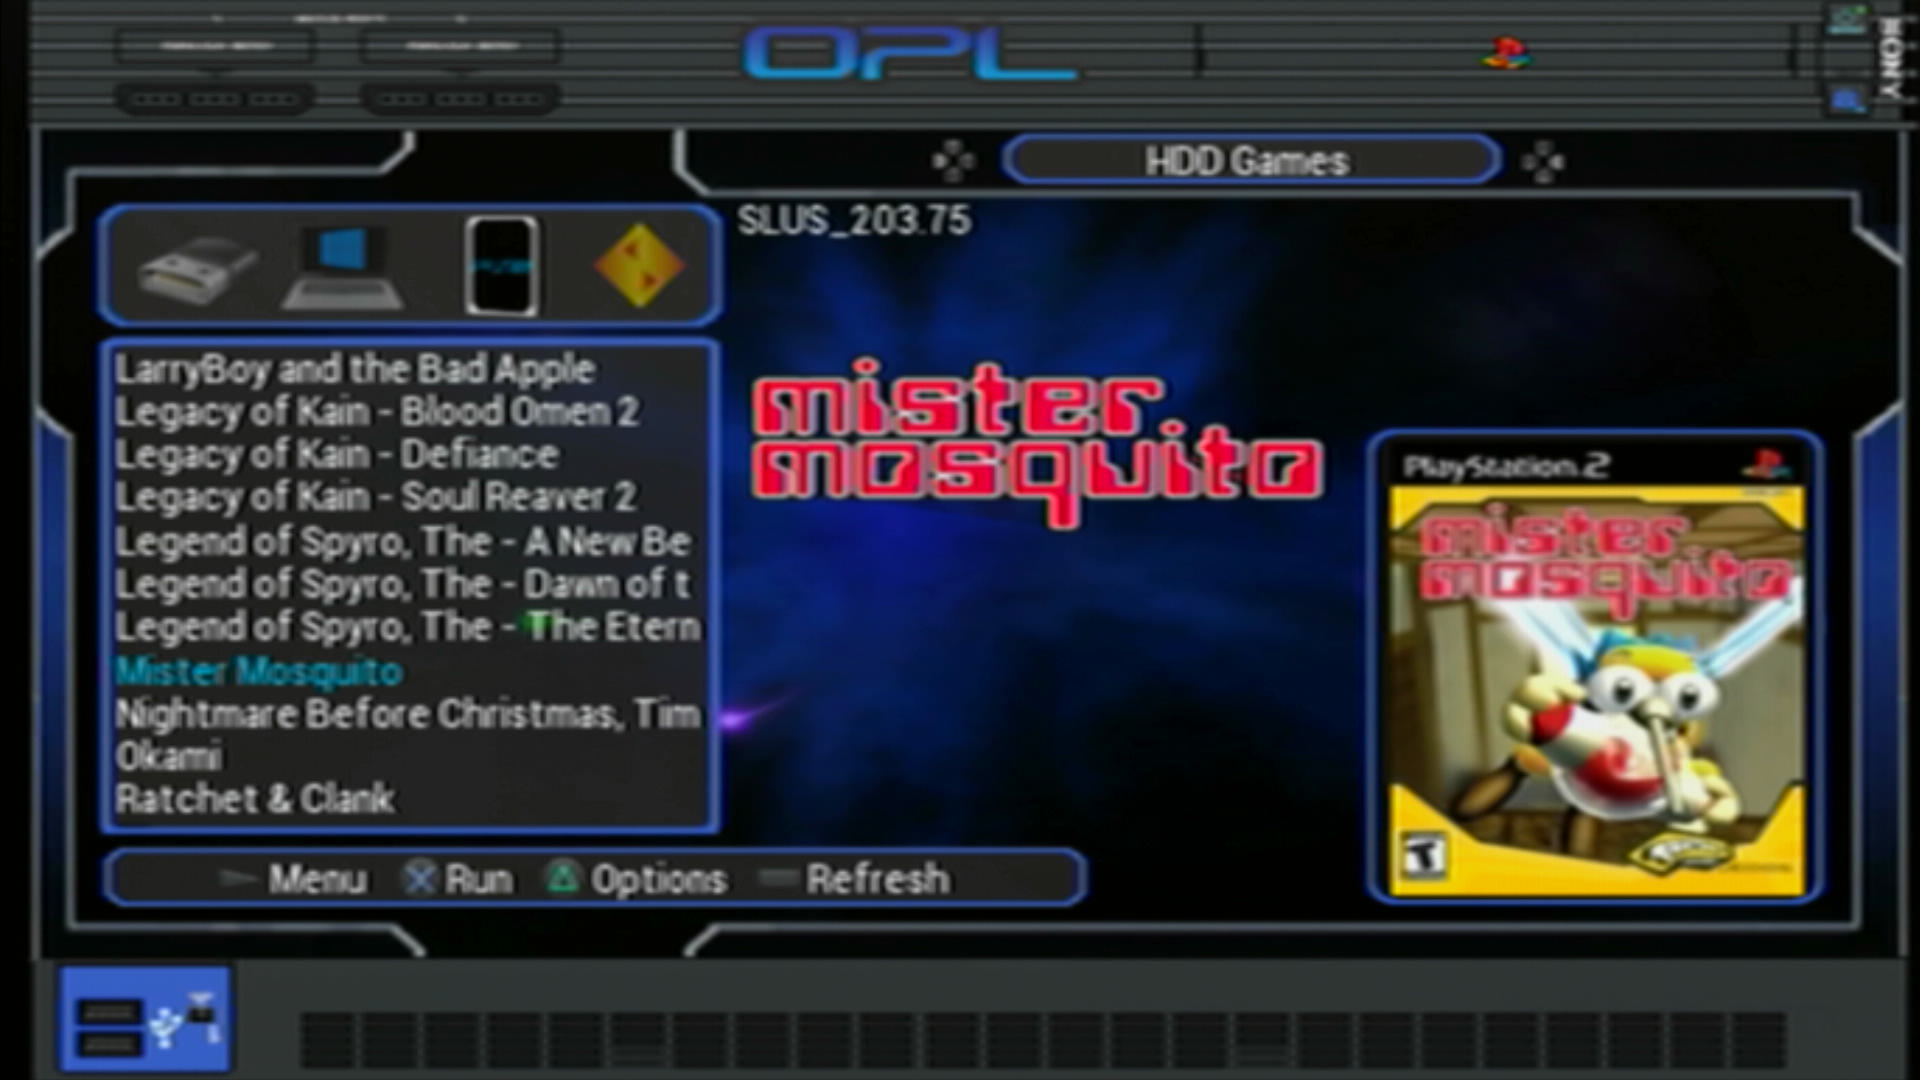 Open PS2 Loader (OPL) Forum -  - PS2 Homebrew and Tools